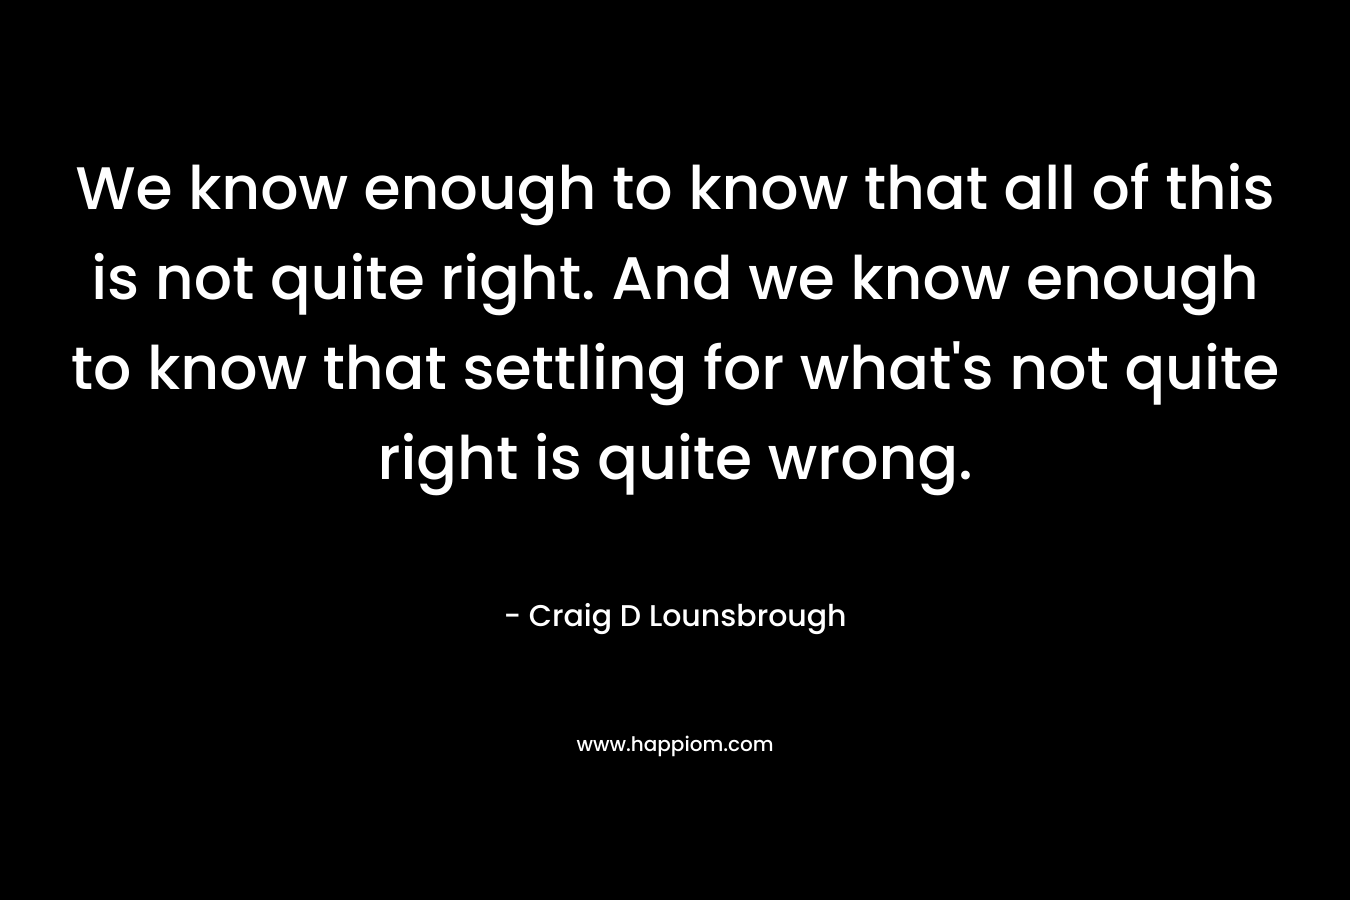 We know enough to know that all of this is not quite right. And we know enough to know that settling for what's not quite right is quite wrong.